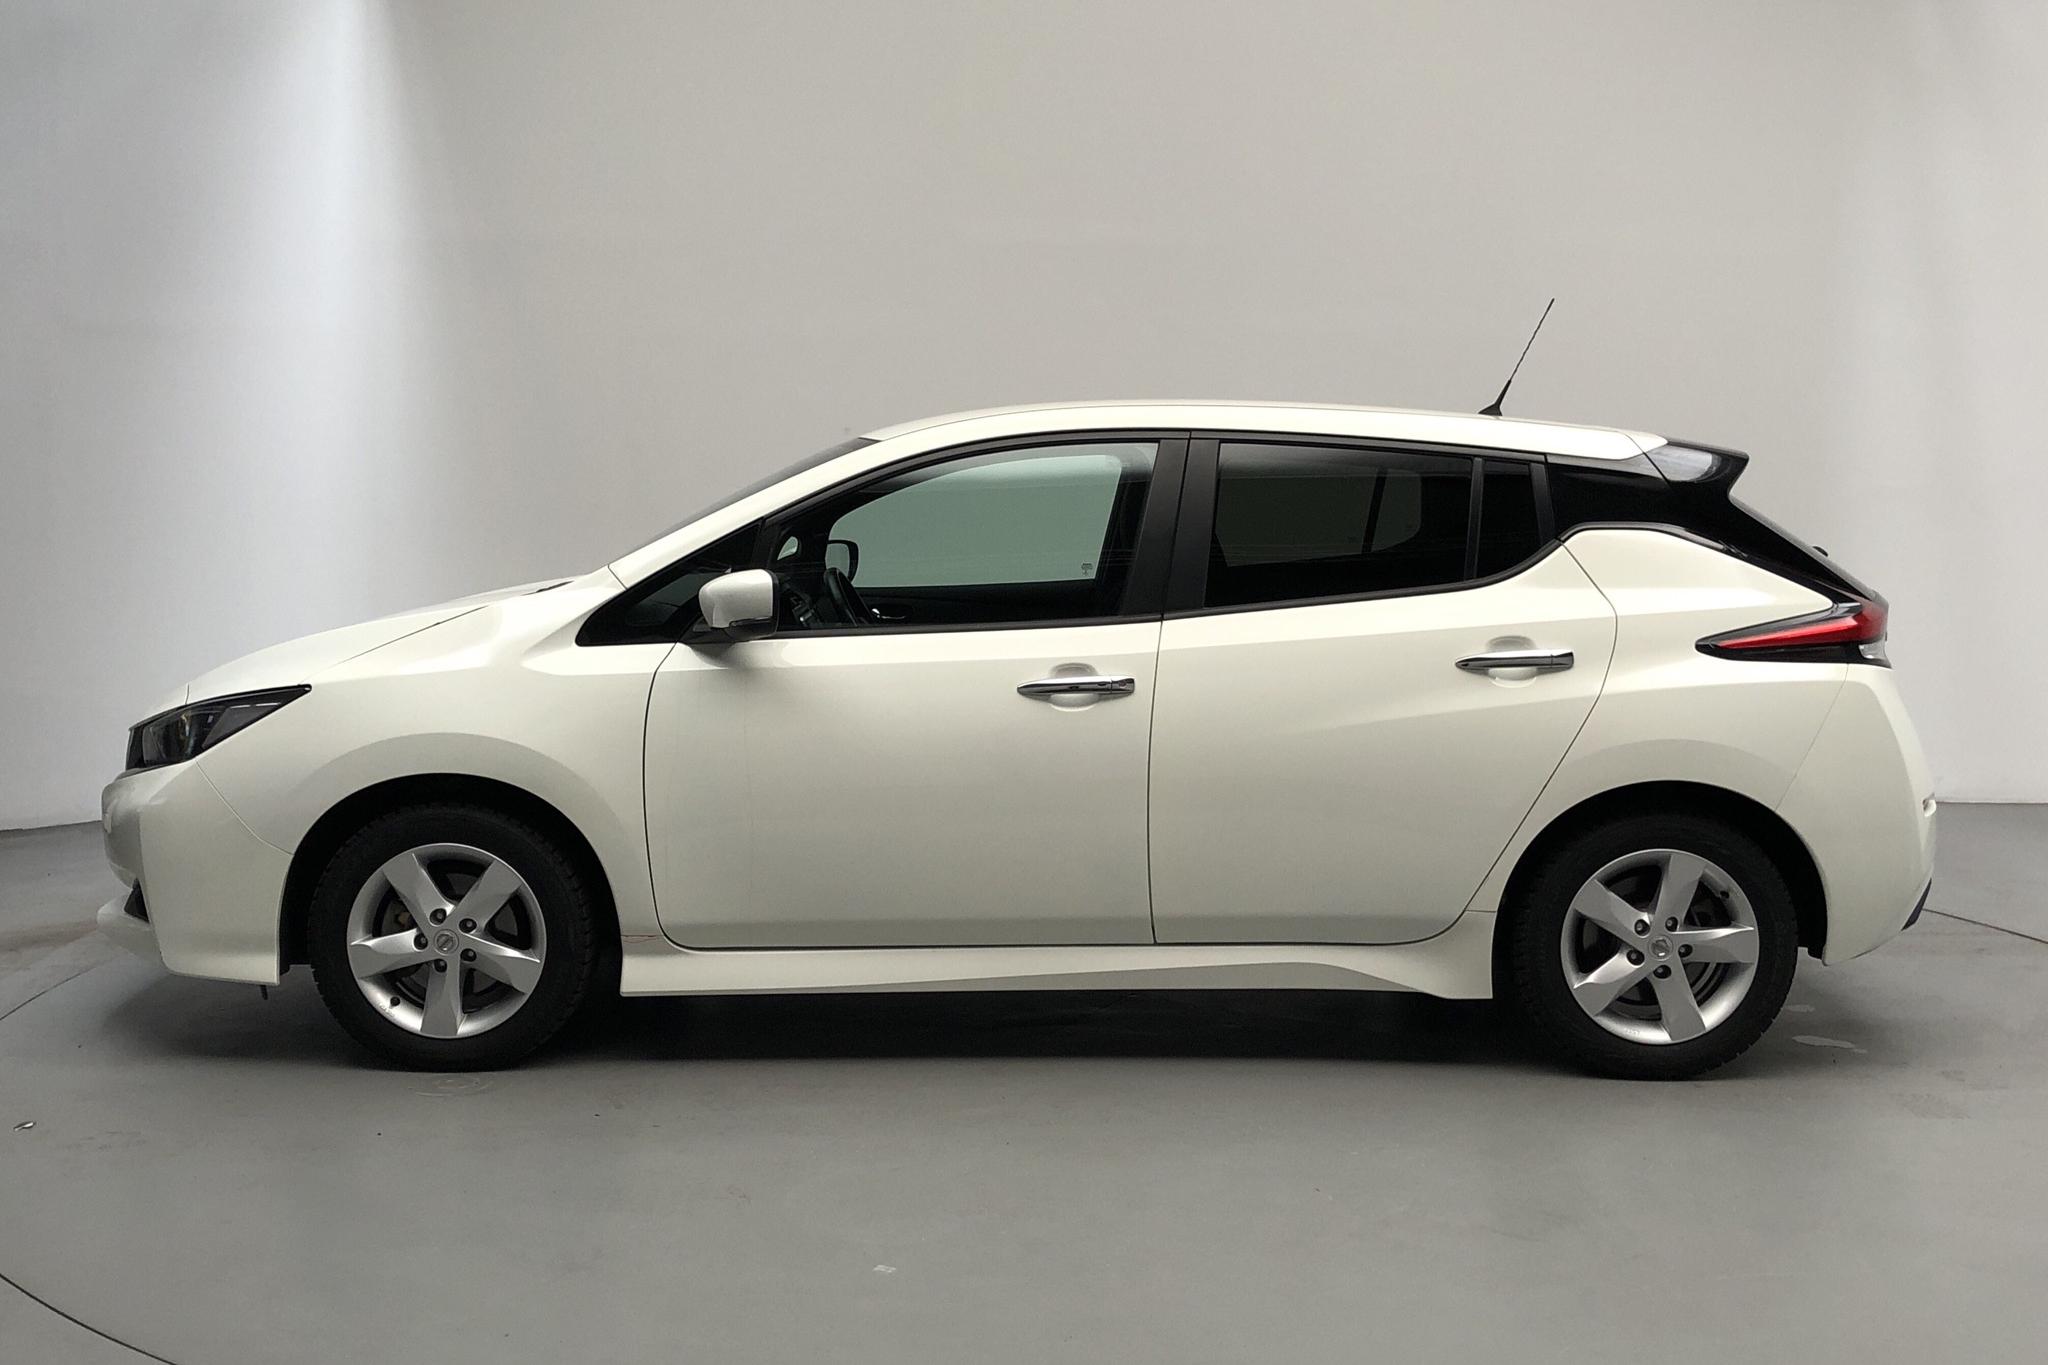 Nissan LEAF 5dr 40 kWh (150hk) - 45 240 km - Automatic - white - 2019